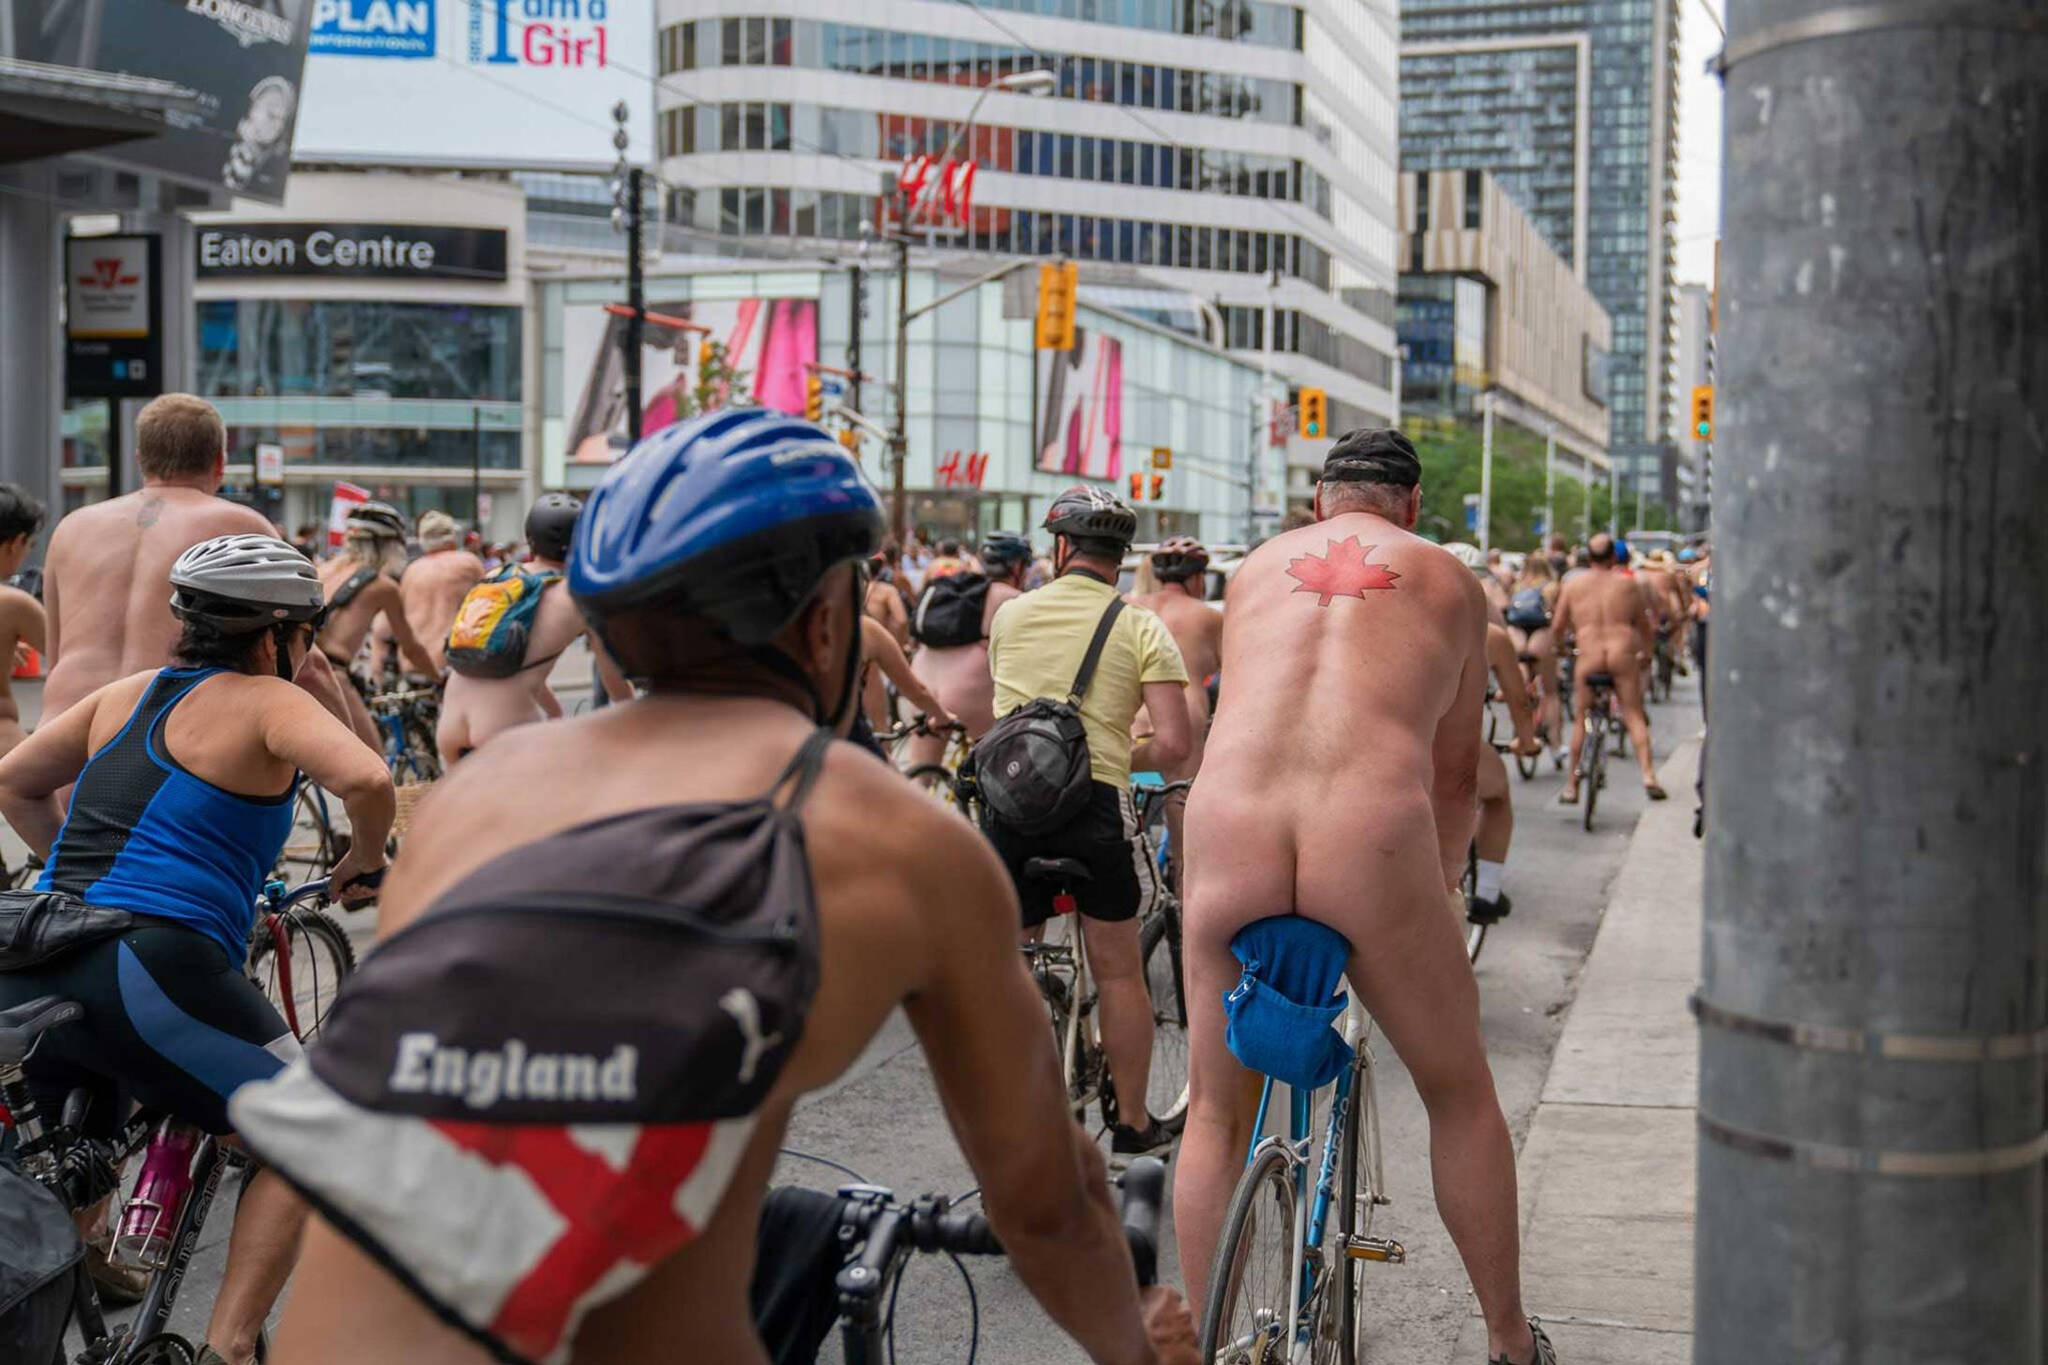 The World Naked Bike Ride is returning to Toronto this year